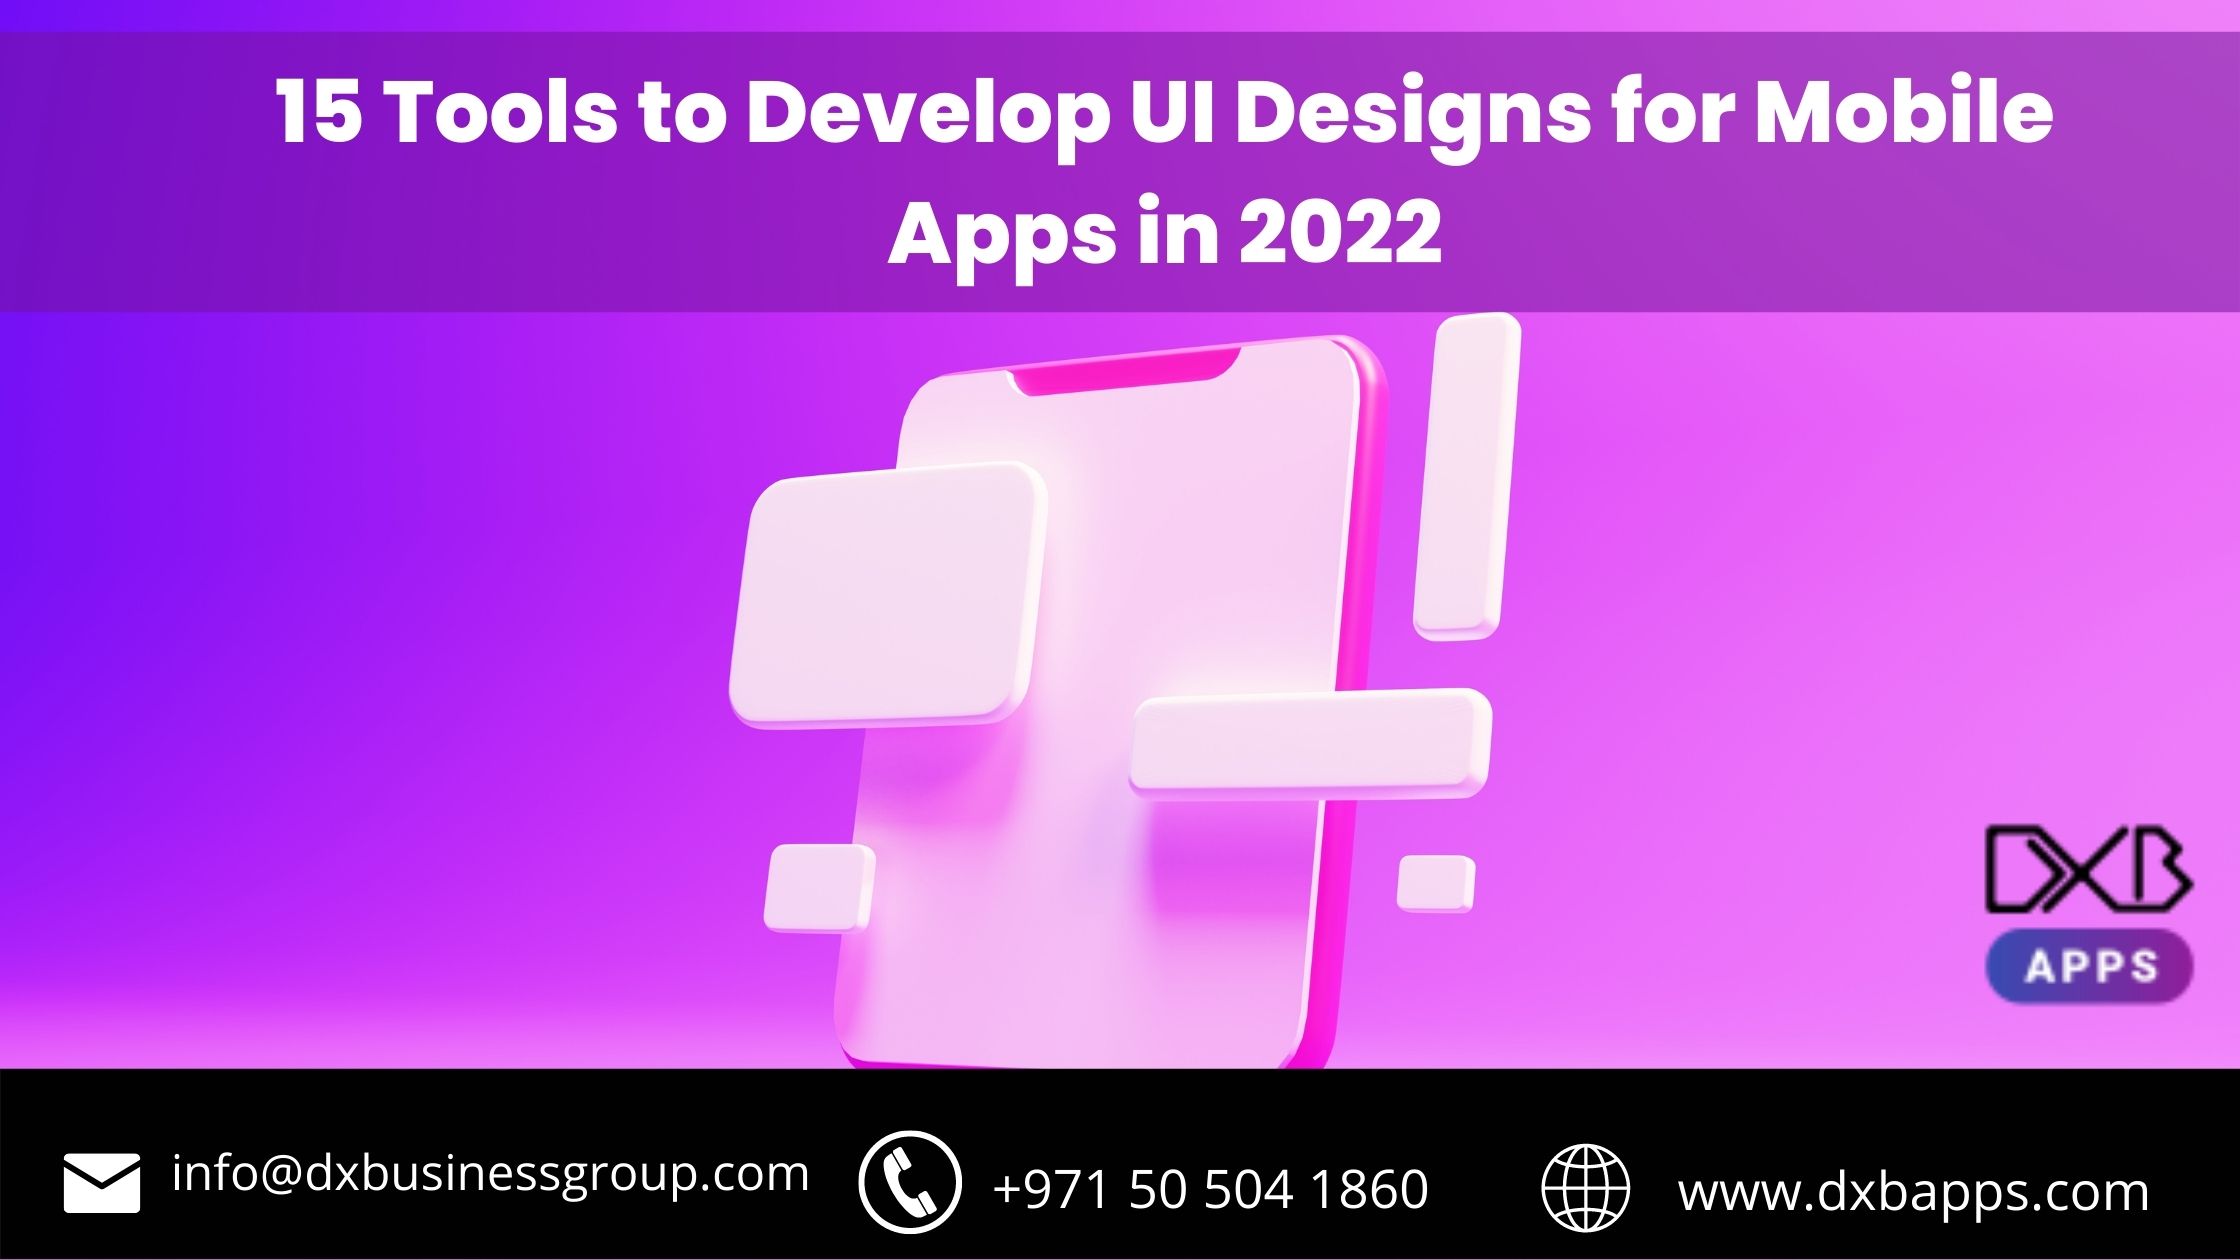 15 Tools to Develop UI Designs for Mobile Apps in 2022